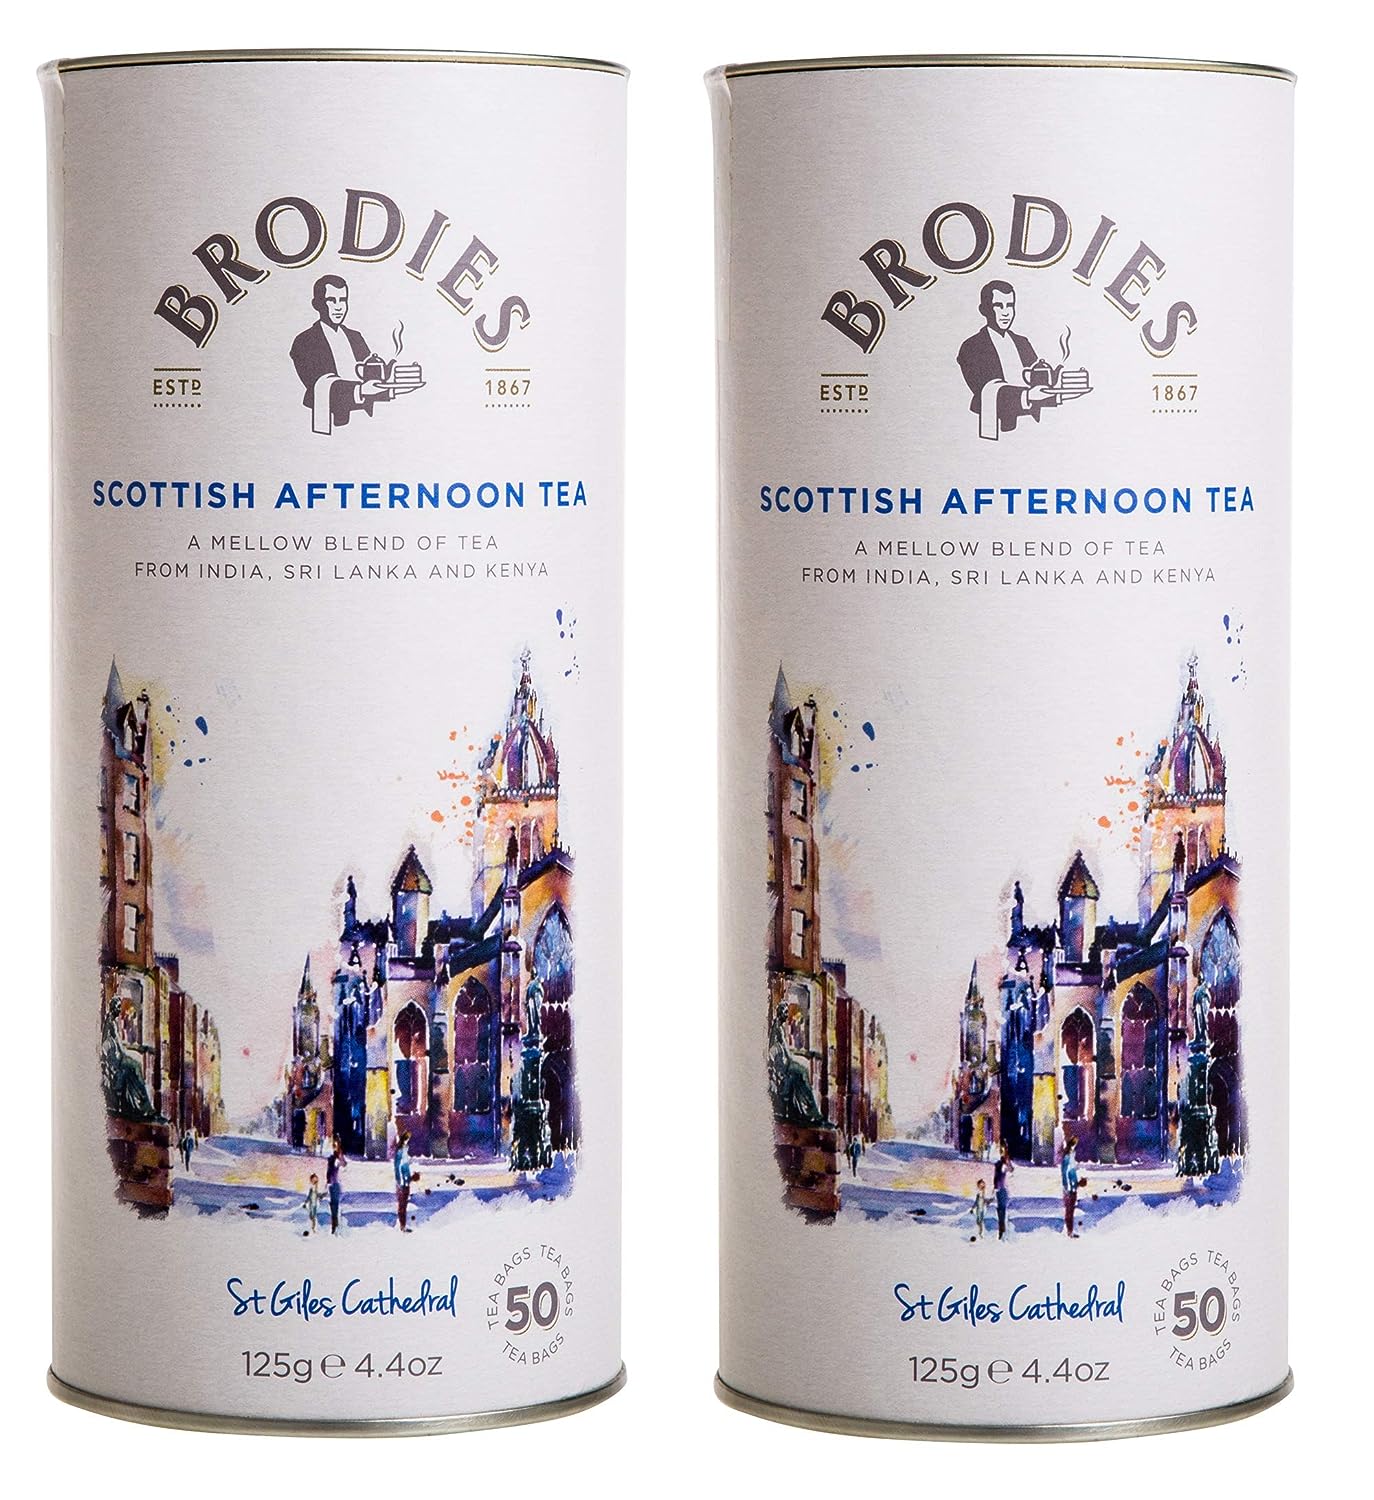 Brodies Tea, Scottish Afternoon Tea, 50-Count Bags of Black Tea Imported from Scotland (Pack of 2)